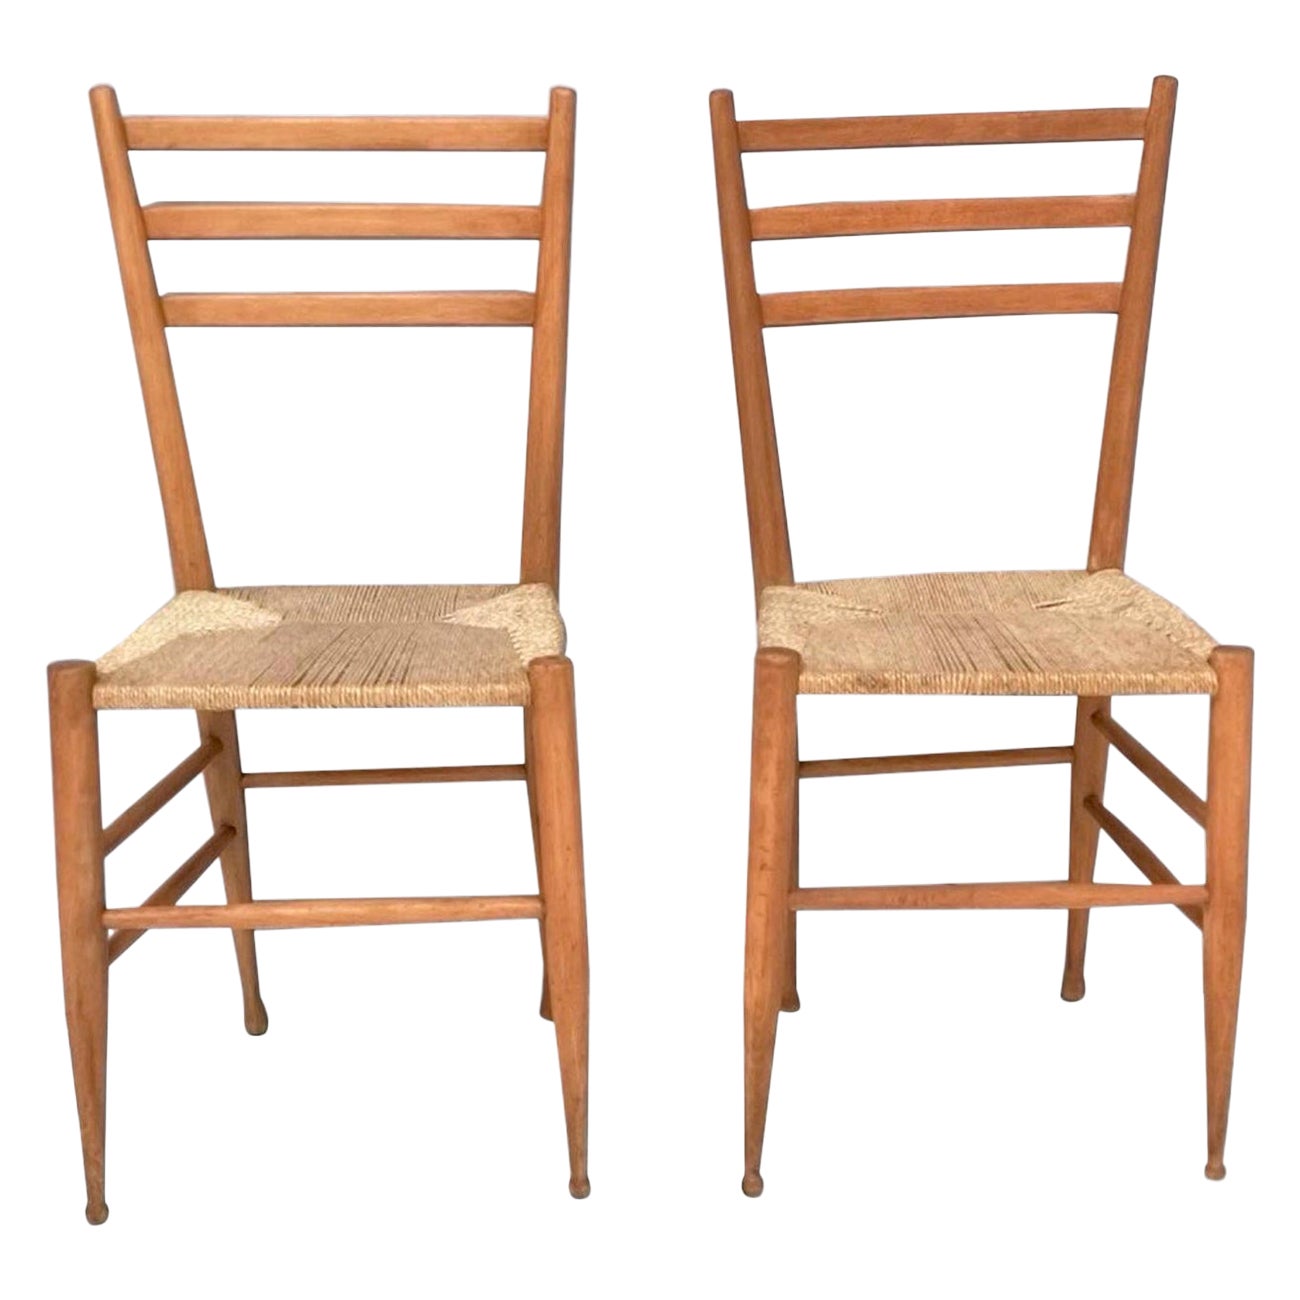 Pair of Vintage Beech and Wicker Chiavarine Chairs with Slatted Backrest, Italy